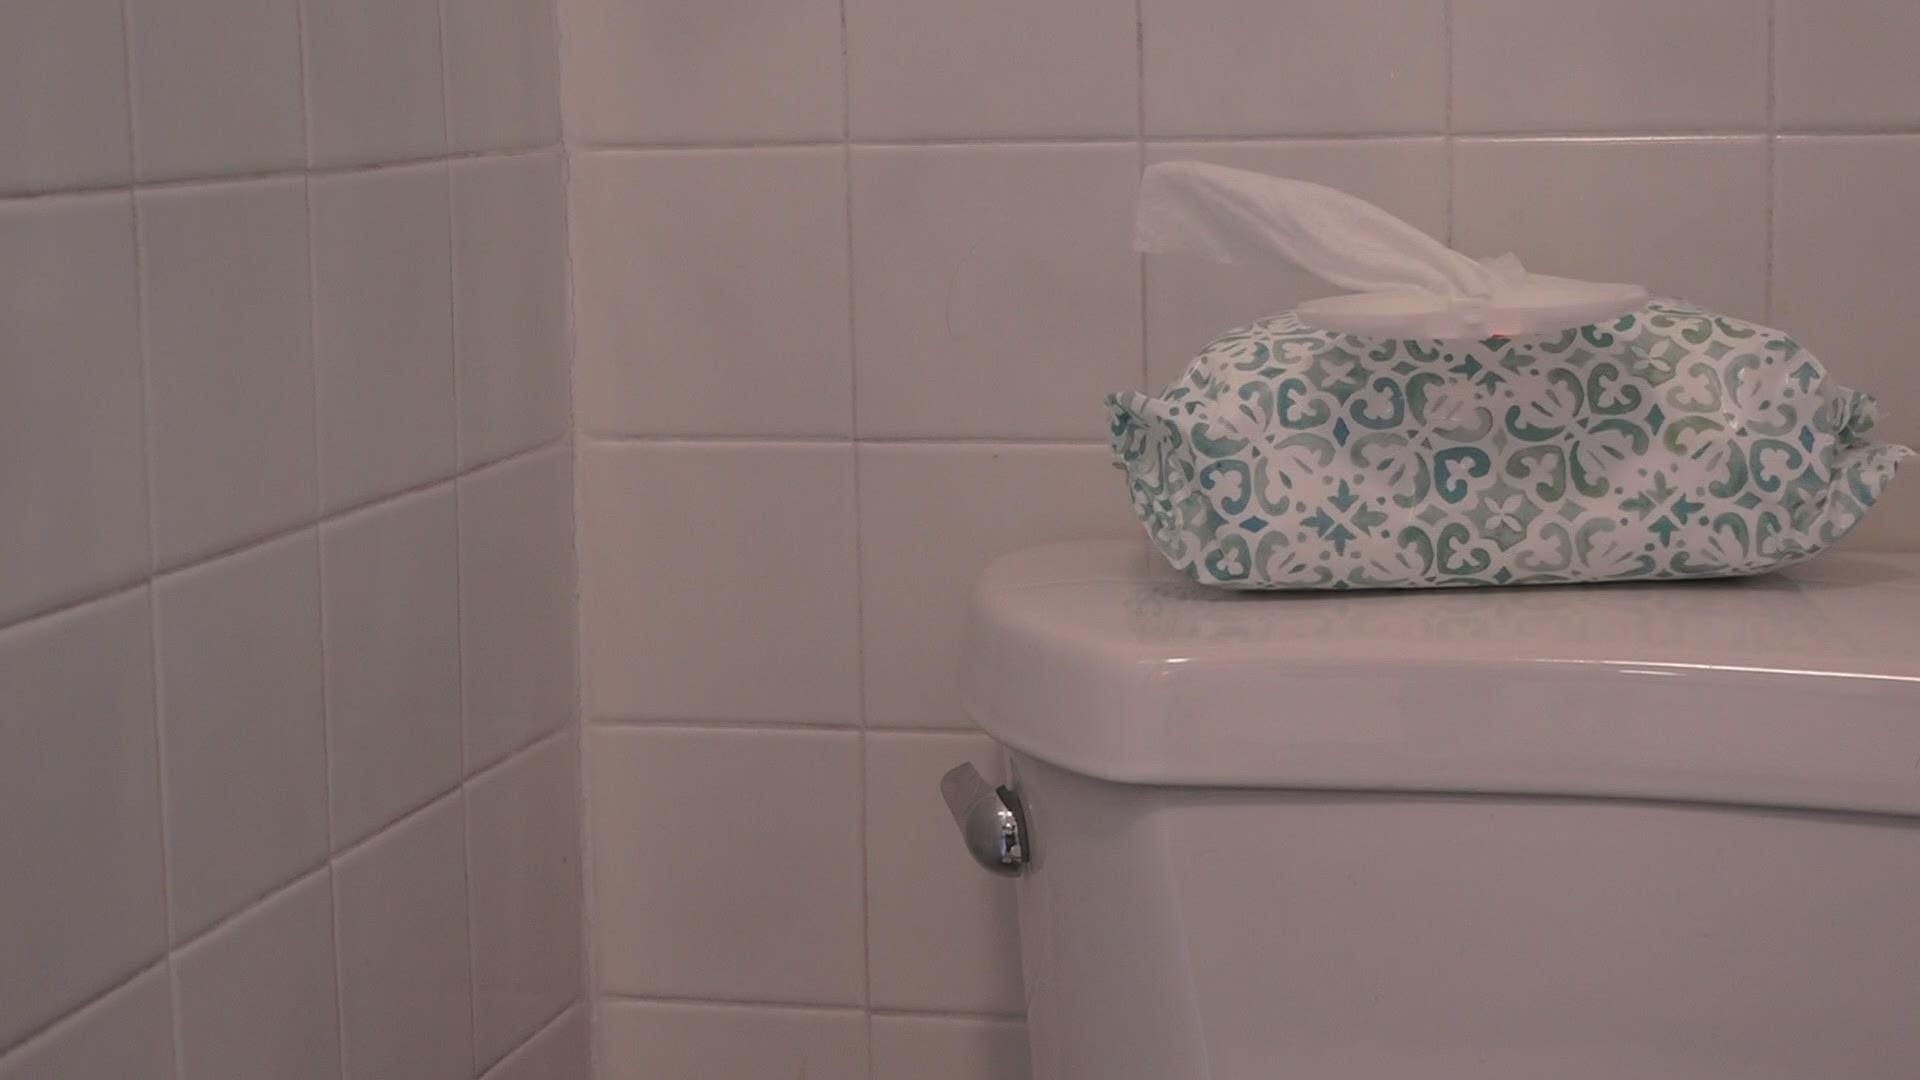 A West Michigan lawmaker is proposing a bill that would ban the sale of wipes that don't have the proper "do not flush" labeling.